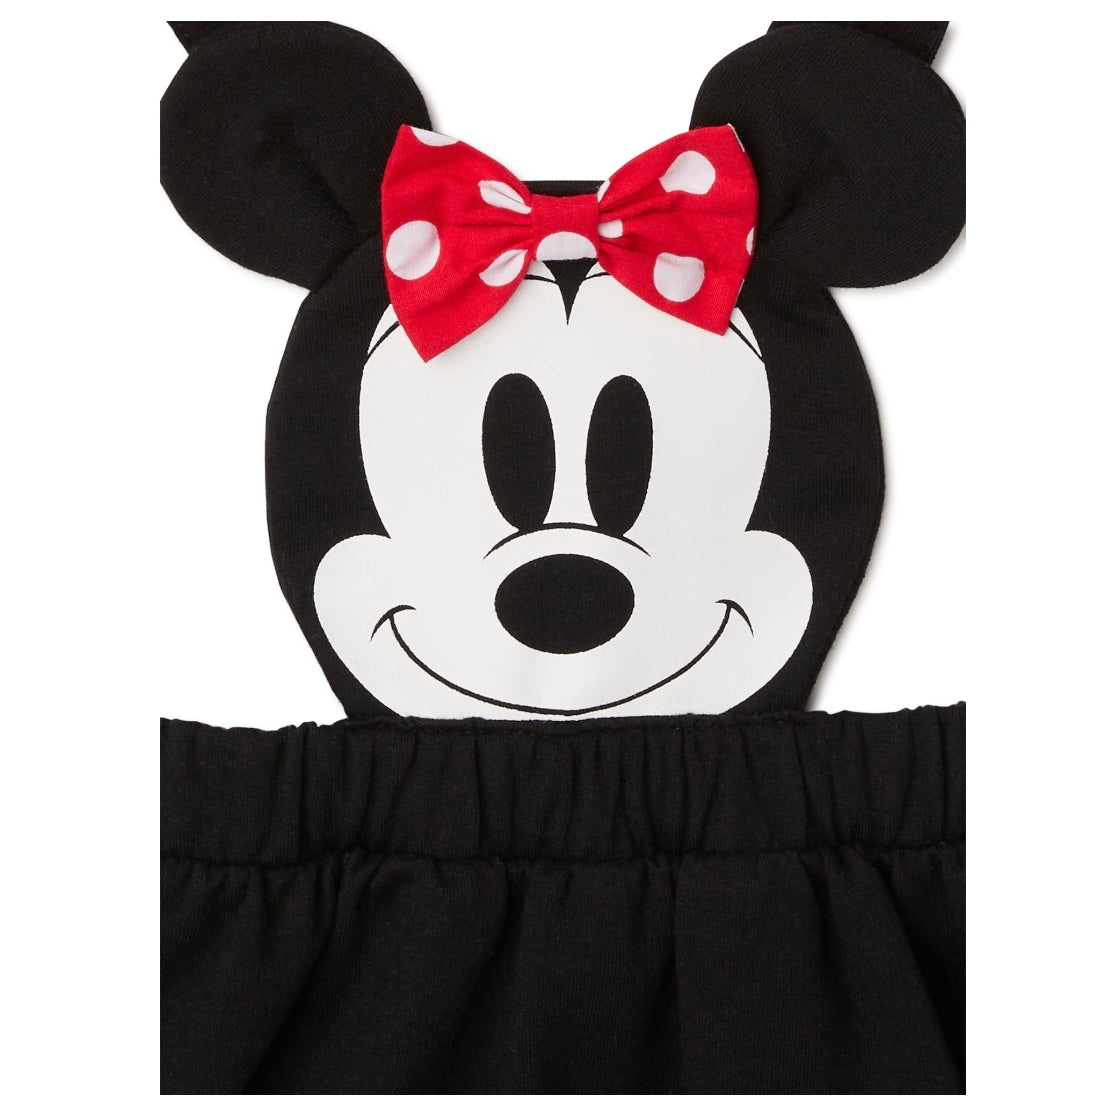 Youth, Disney Minnie Mouse Baby Girls Bodysuit, Pinafore, and Headband, 3pc Set